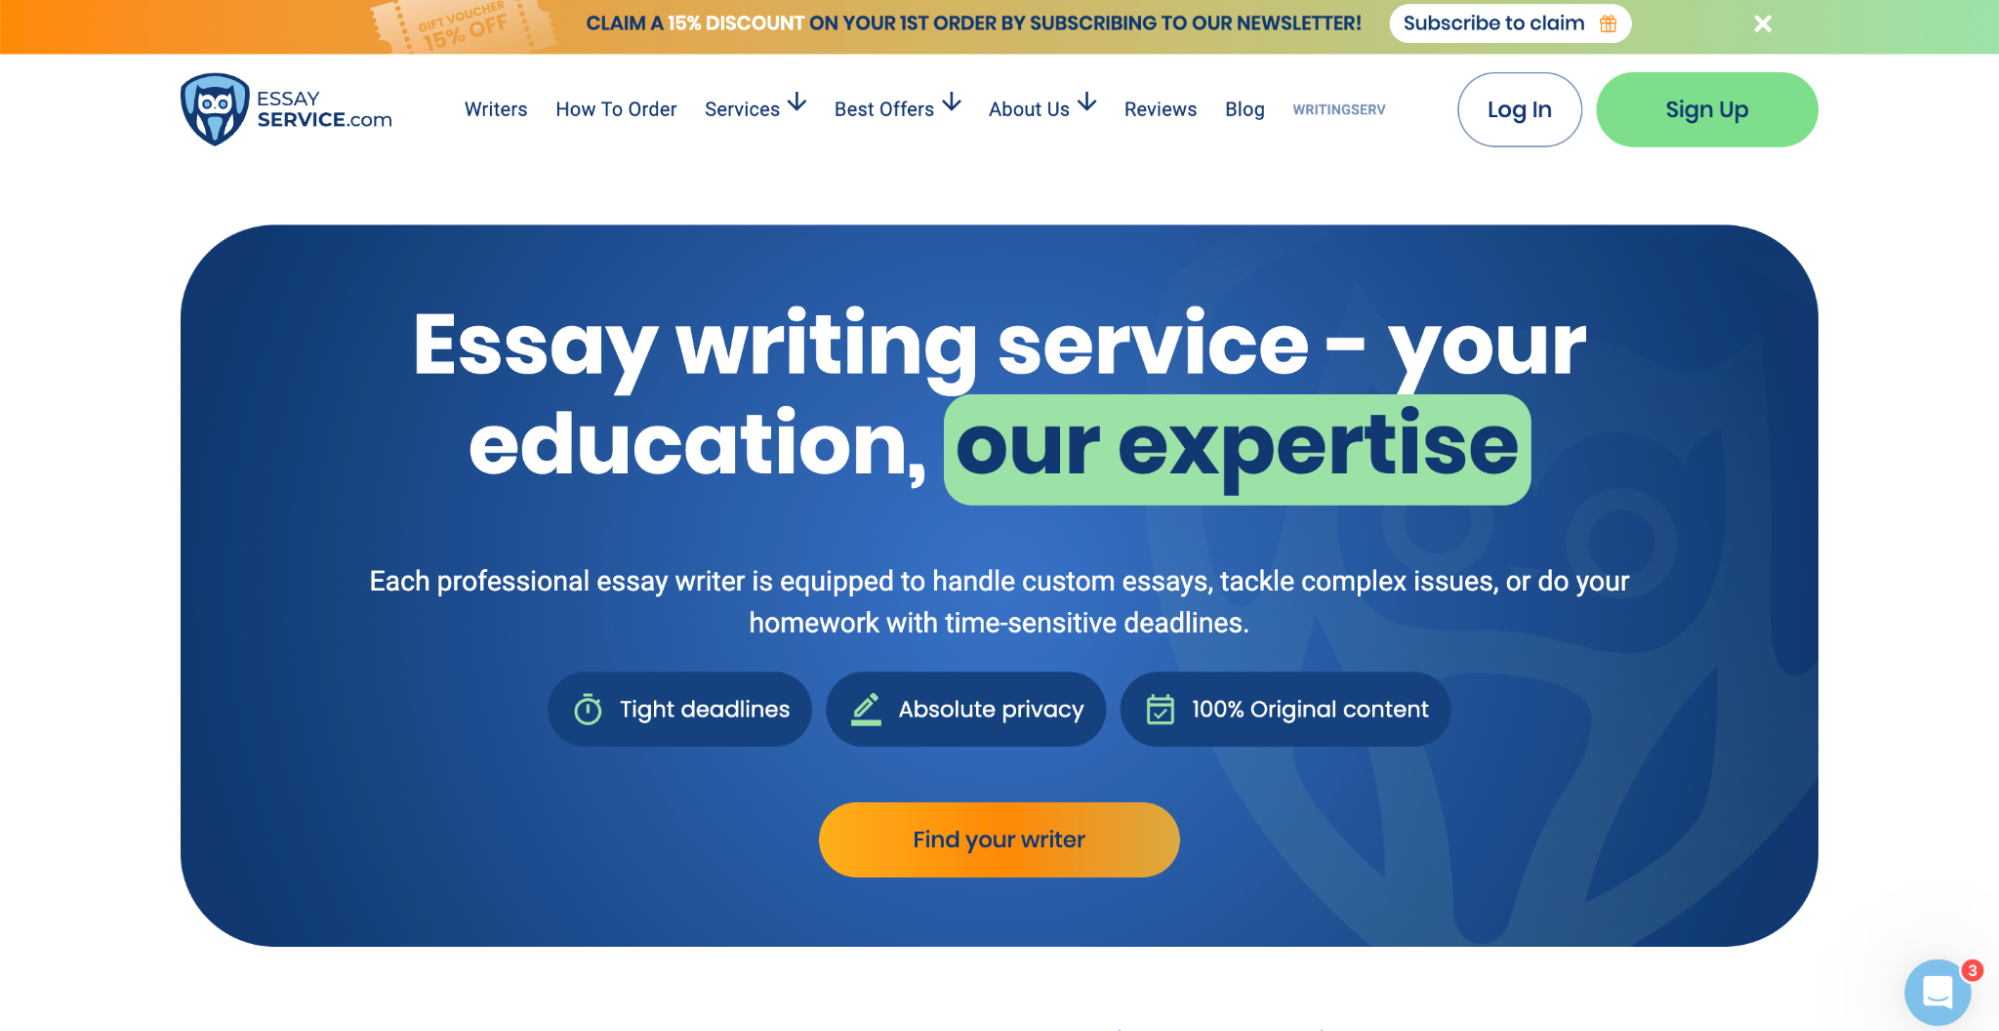 Why Some People Almost Always Save Money With Cheap Essay Writing Service